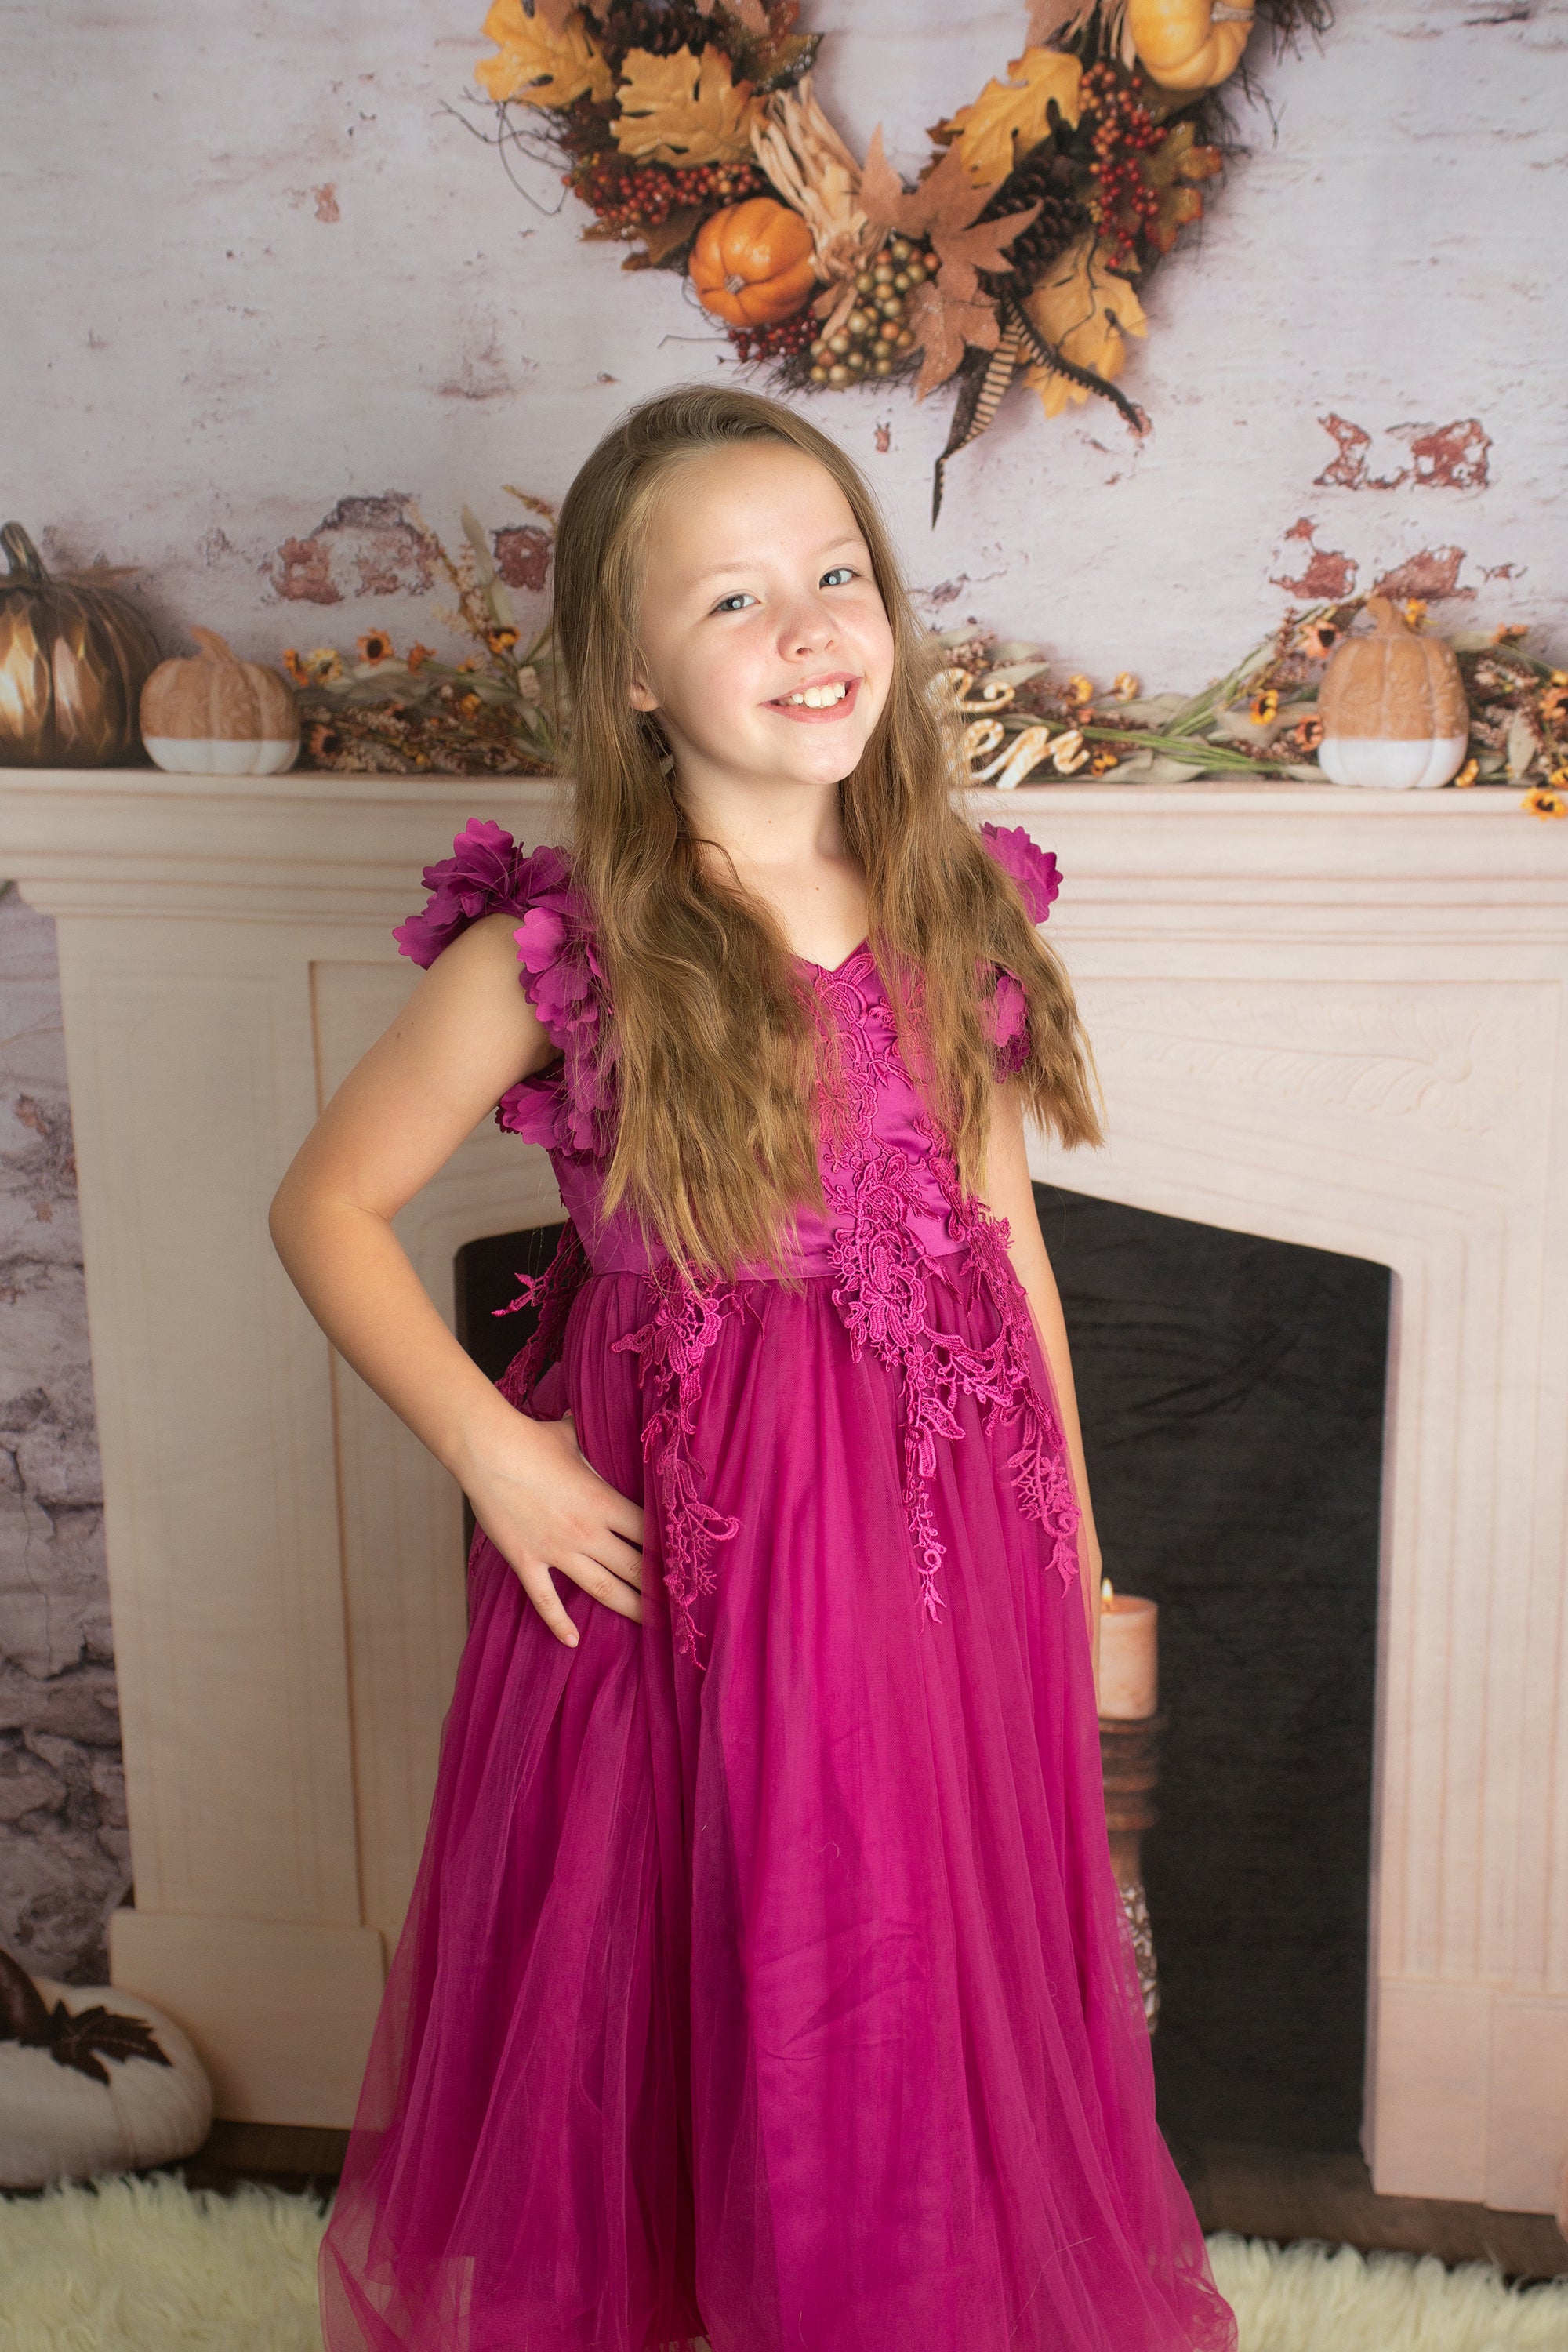 Kate Autumn Thanksgiving Pumpkins Decorations Room Backdrop Designed By Pine Park Collection